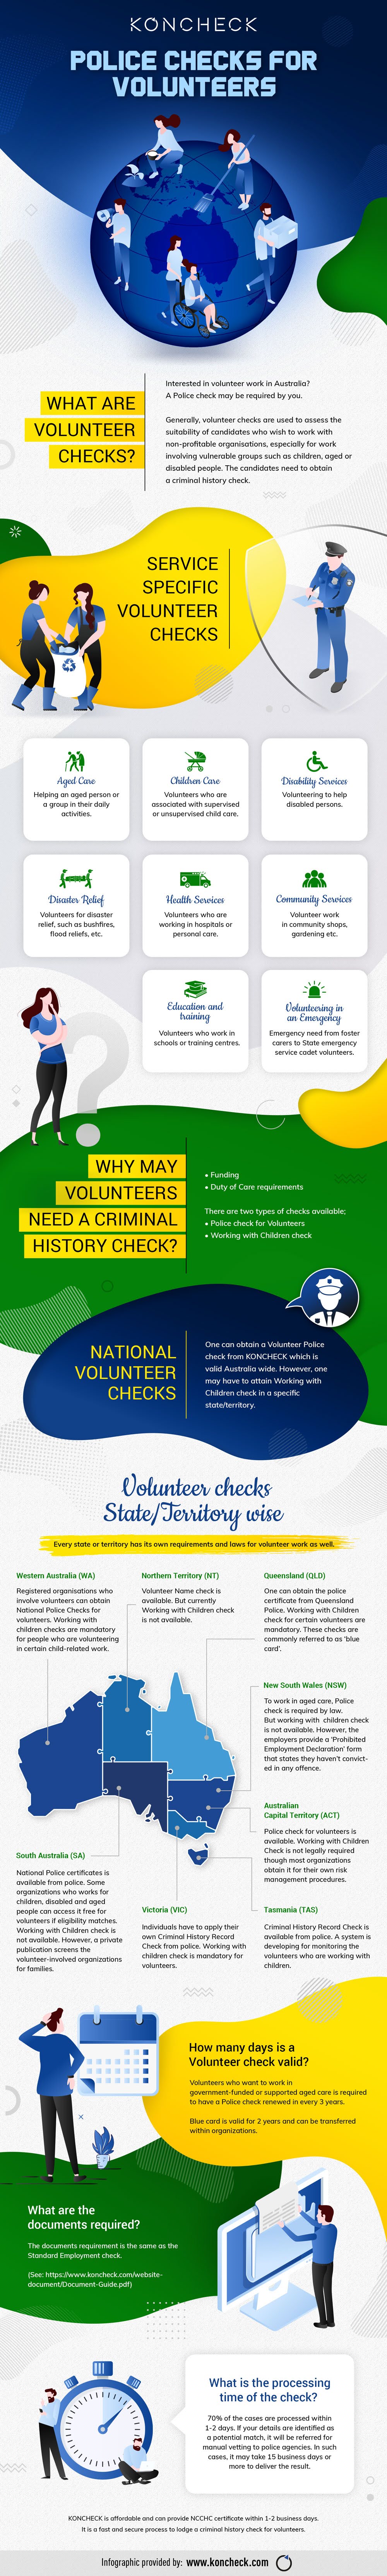 How a Criminal History Check is Important for a Volunteer #infographic